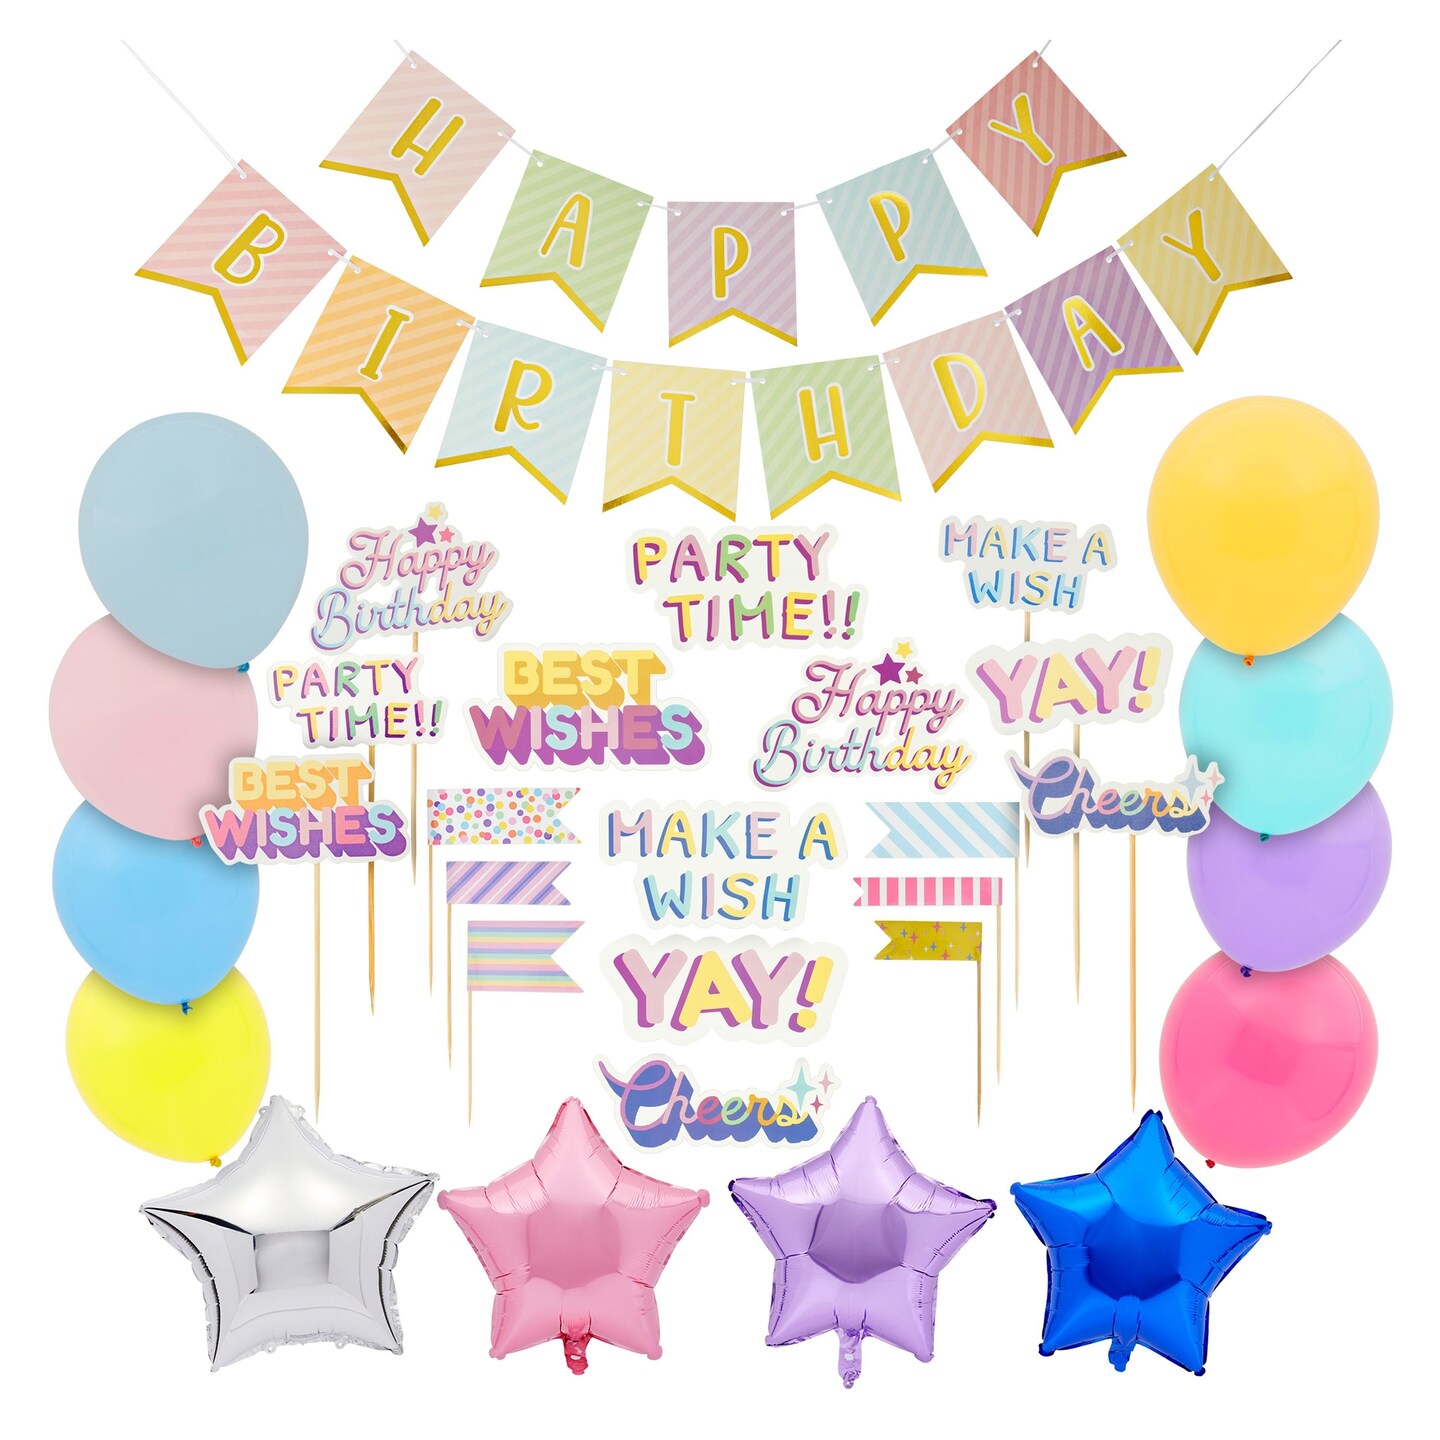  28 Singer Party Decorations, 3D Singer Birthday Decorations Set  includes Singer Cupcake Topper, Banner, Centerpieces and Swirls, Singer  Birthday Party Decorations : Home & Kitchen